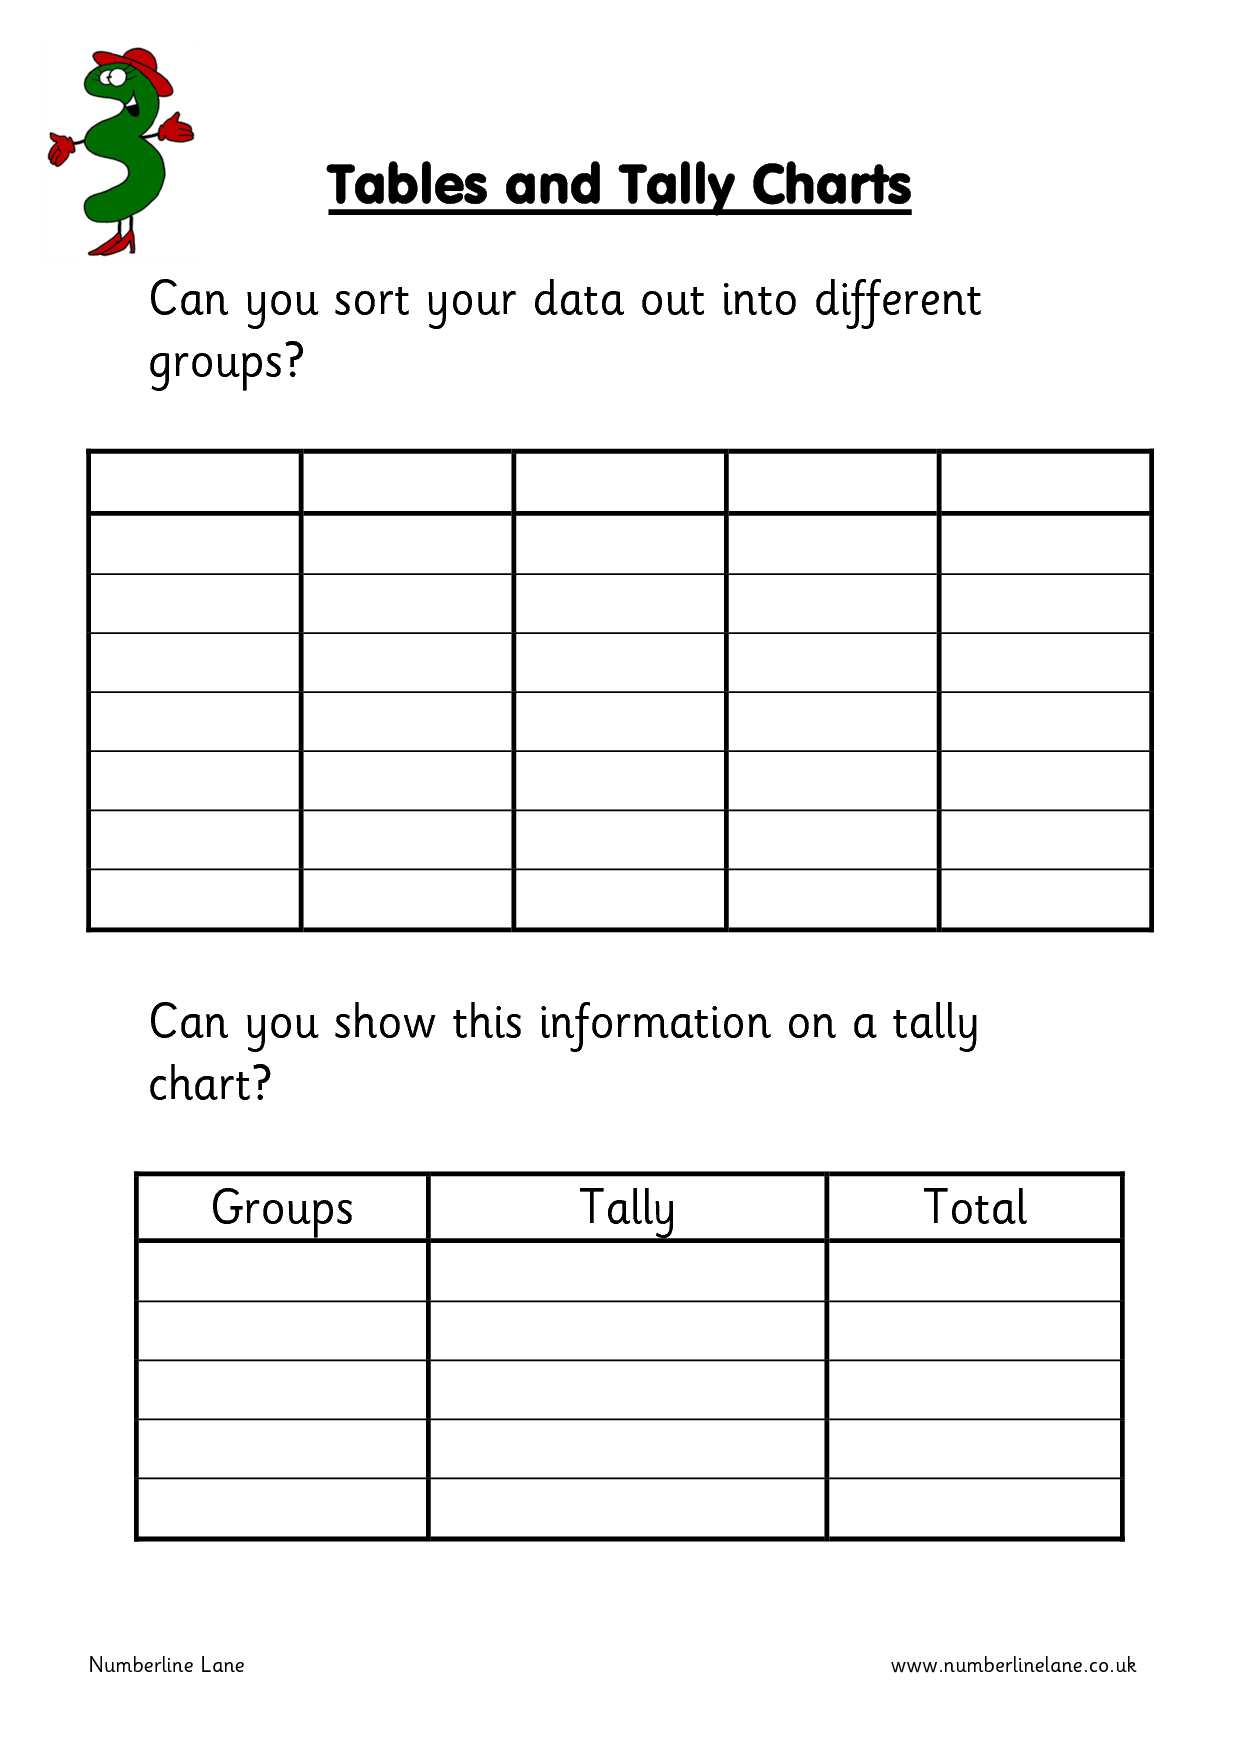 Frequency Tally Chart and Table Image